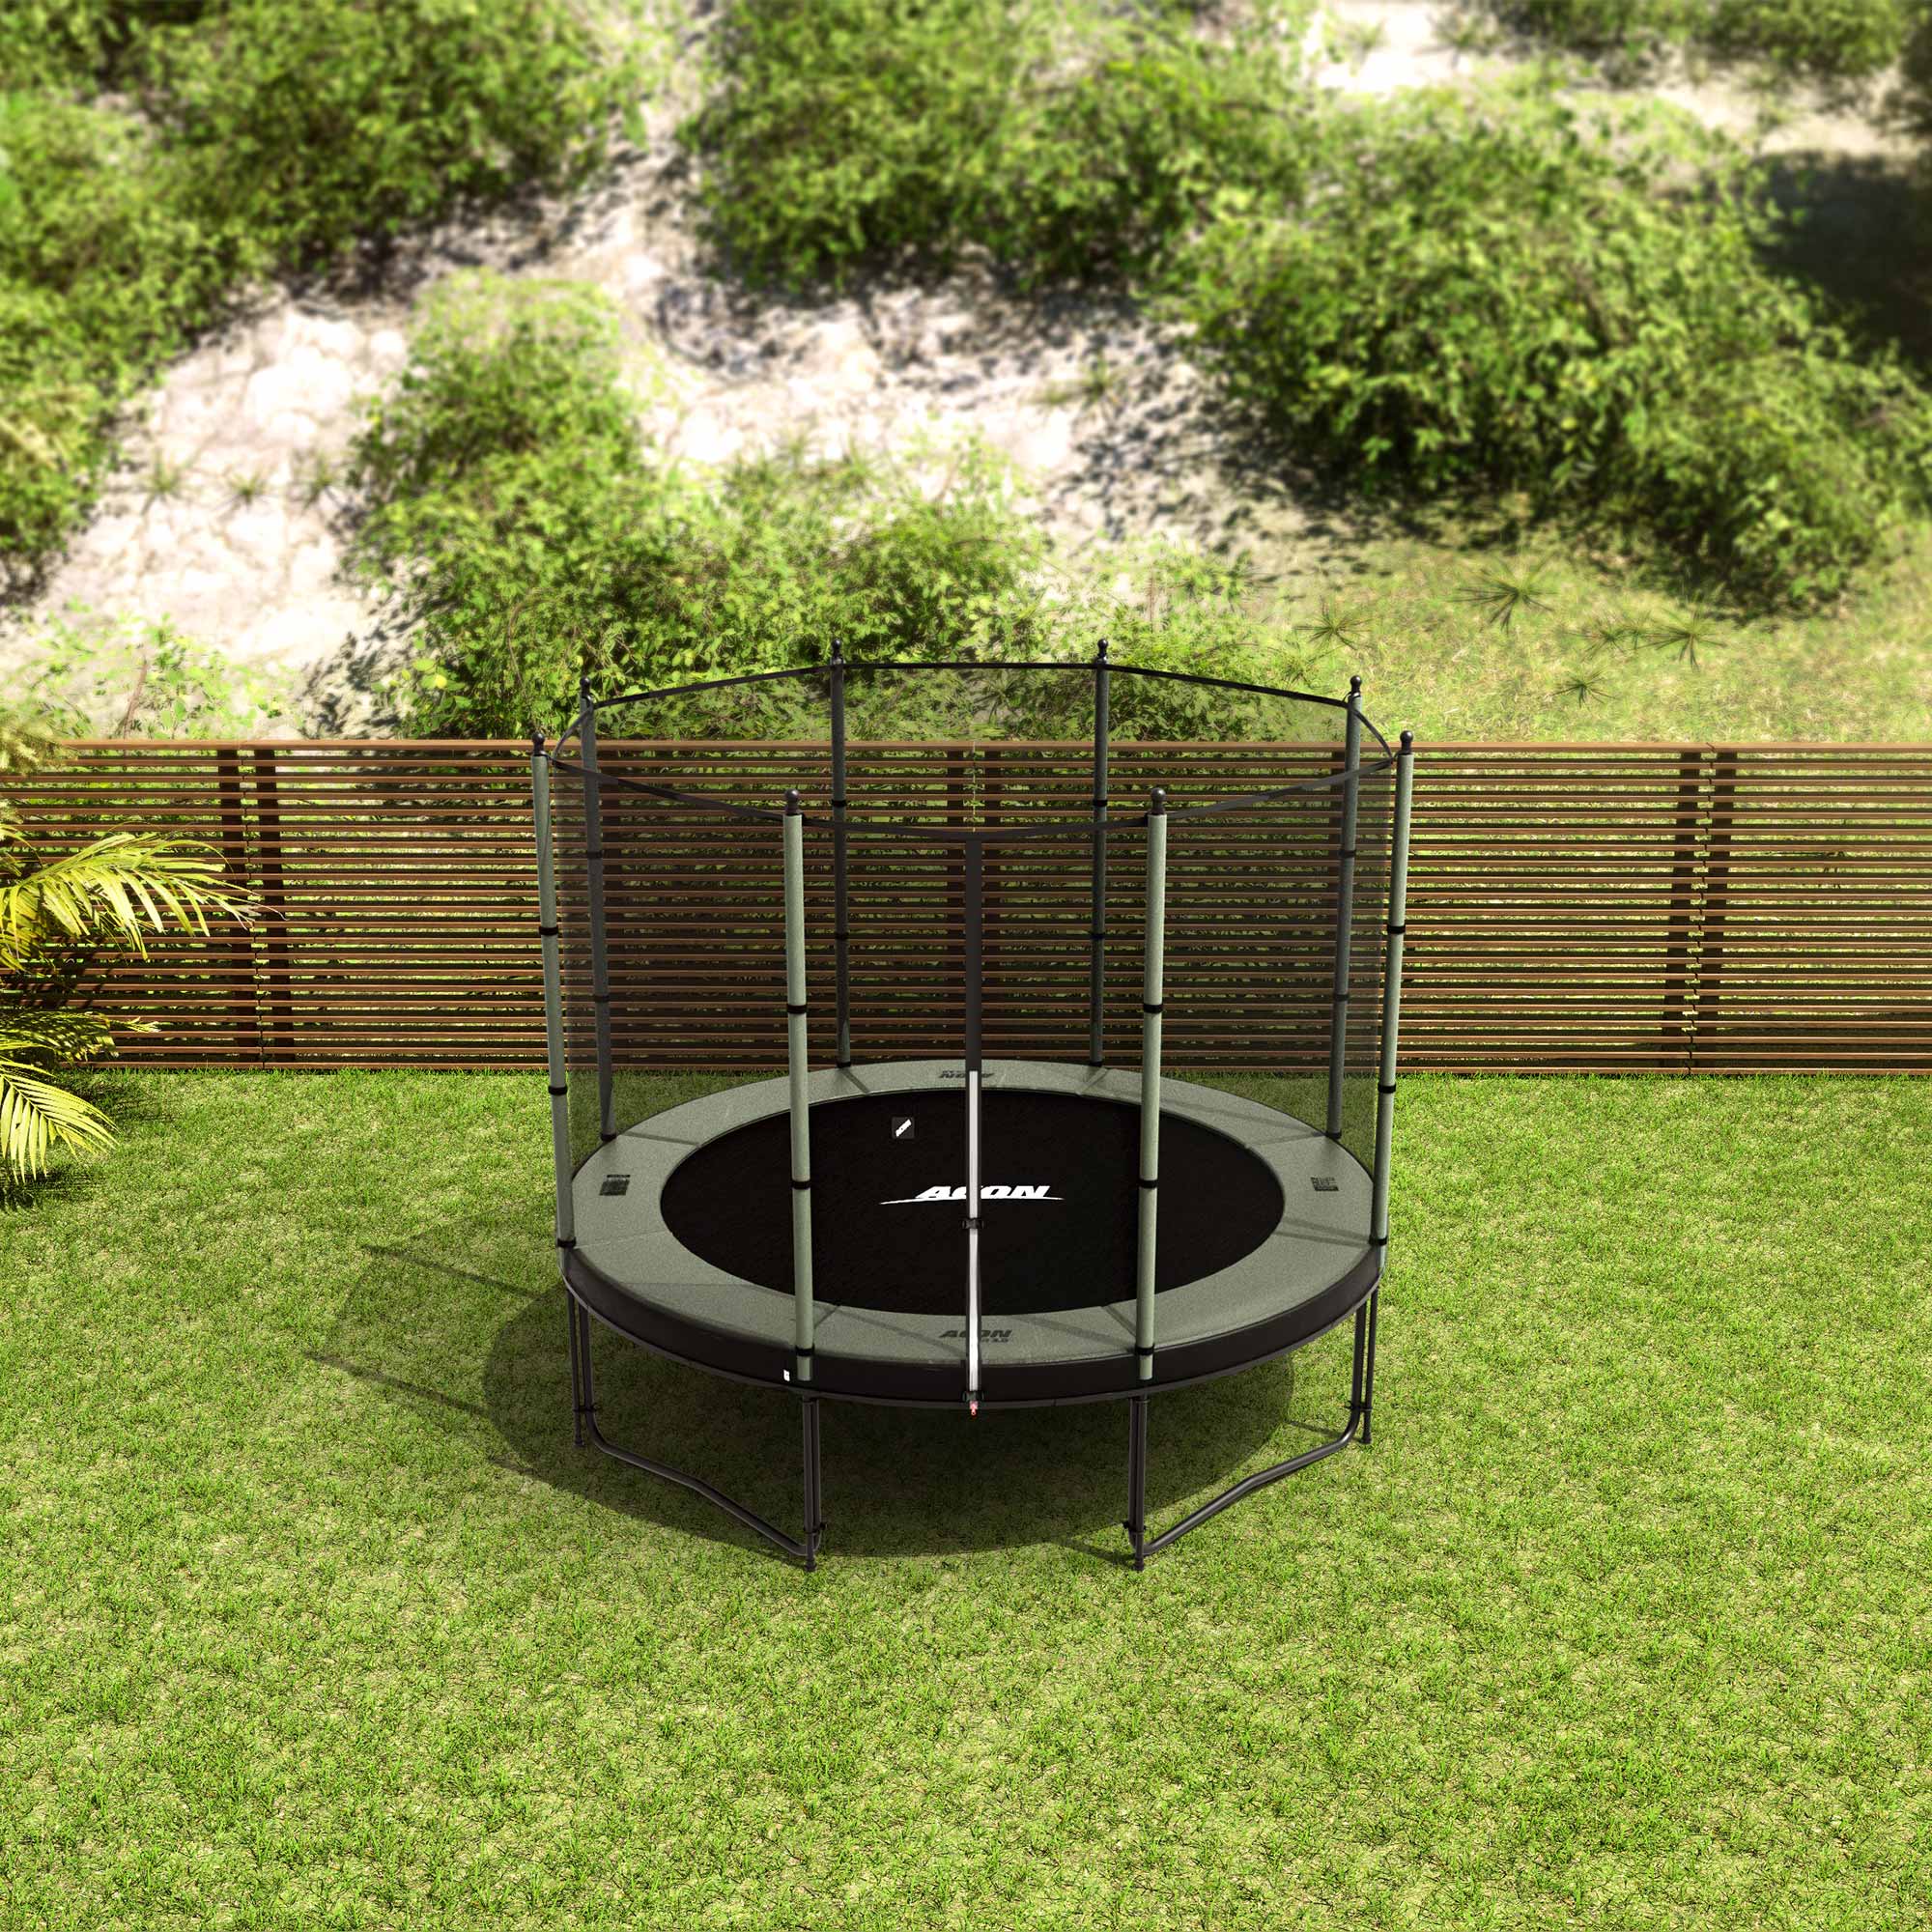 ACON Air 10ft Trampoline with Standard Enclosure in the backyard.